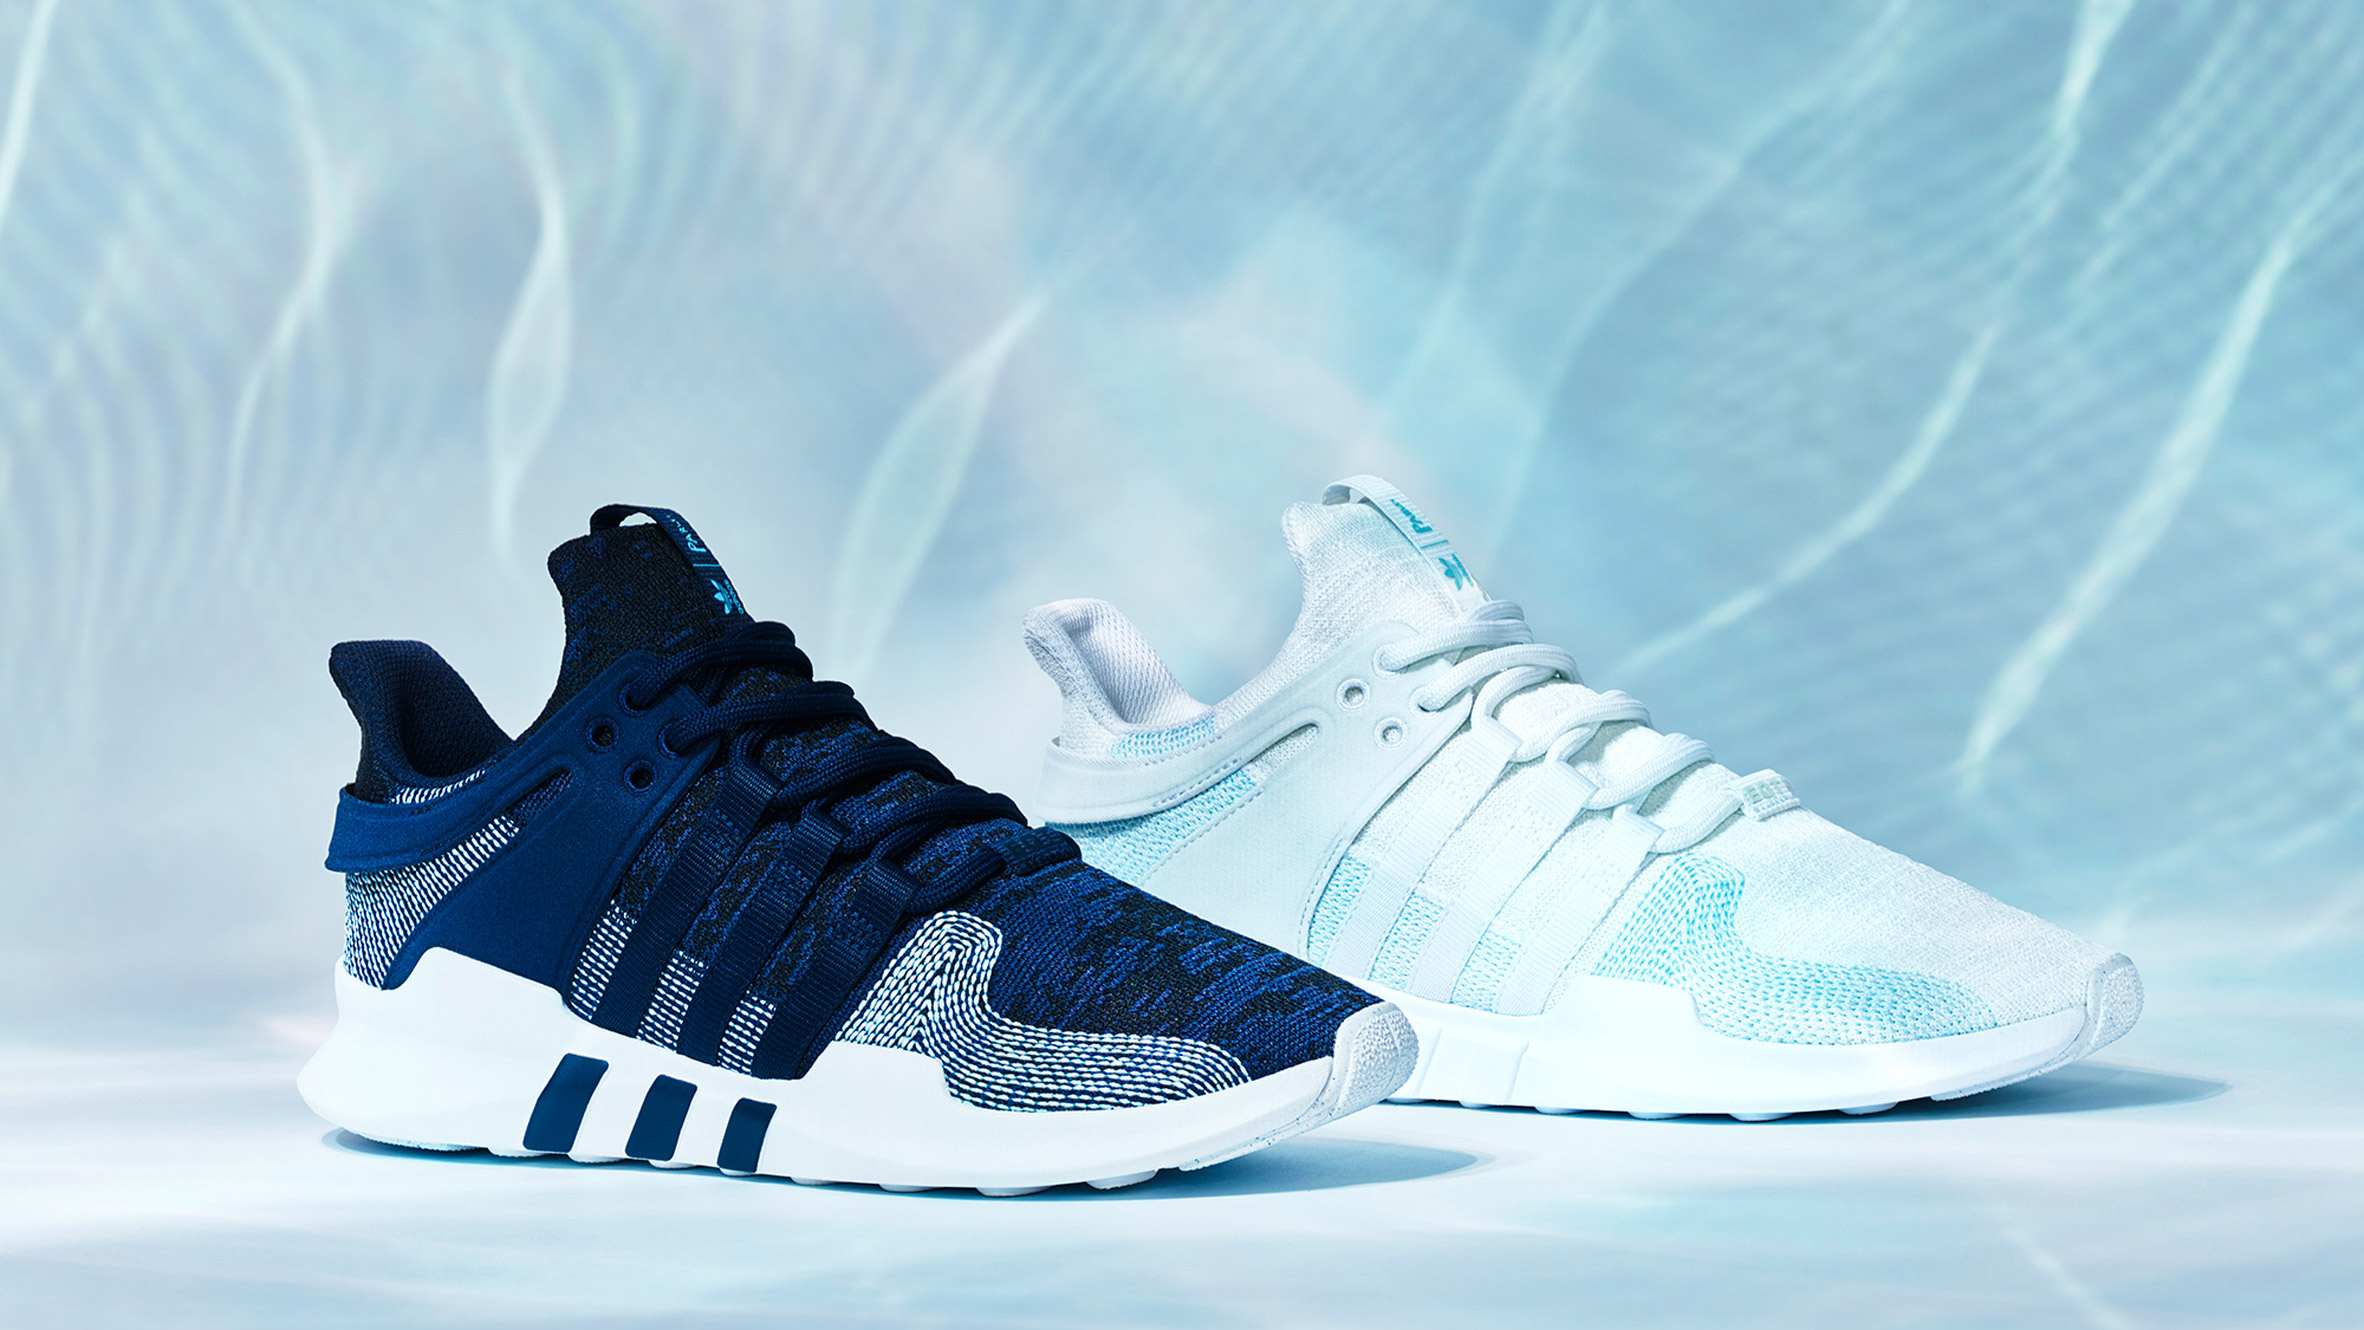 load I'm hungry unforgivable Adidas uses Parley ocean plastic to update one of its classic shoe designs